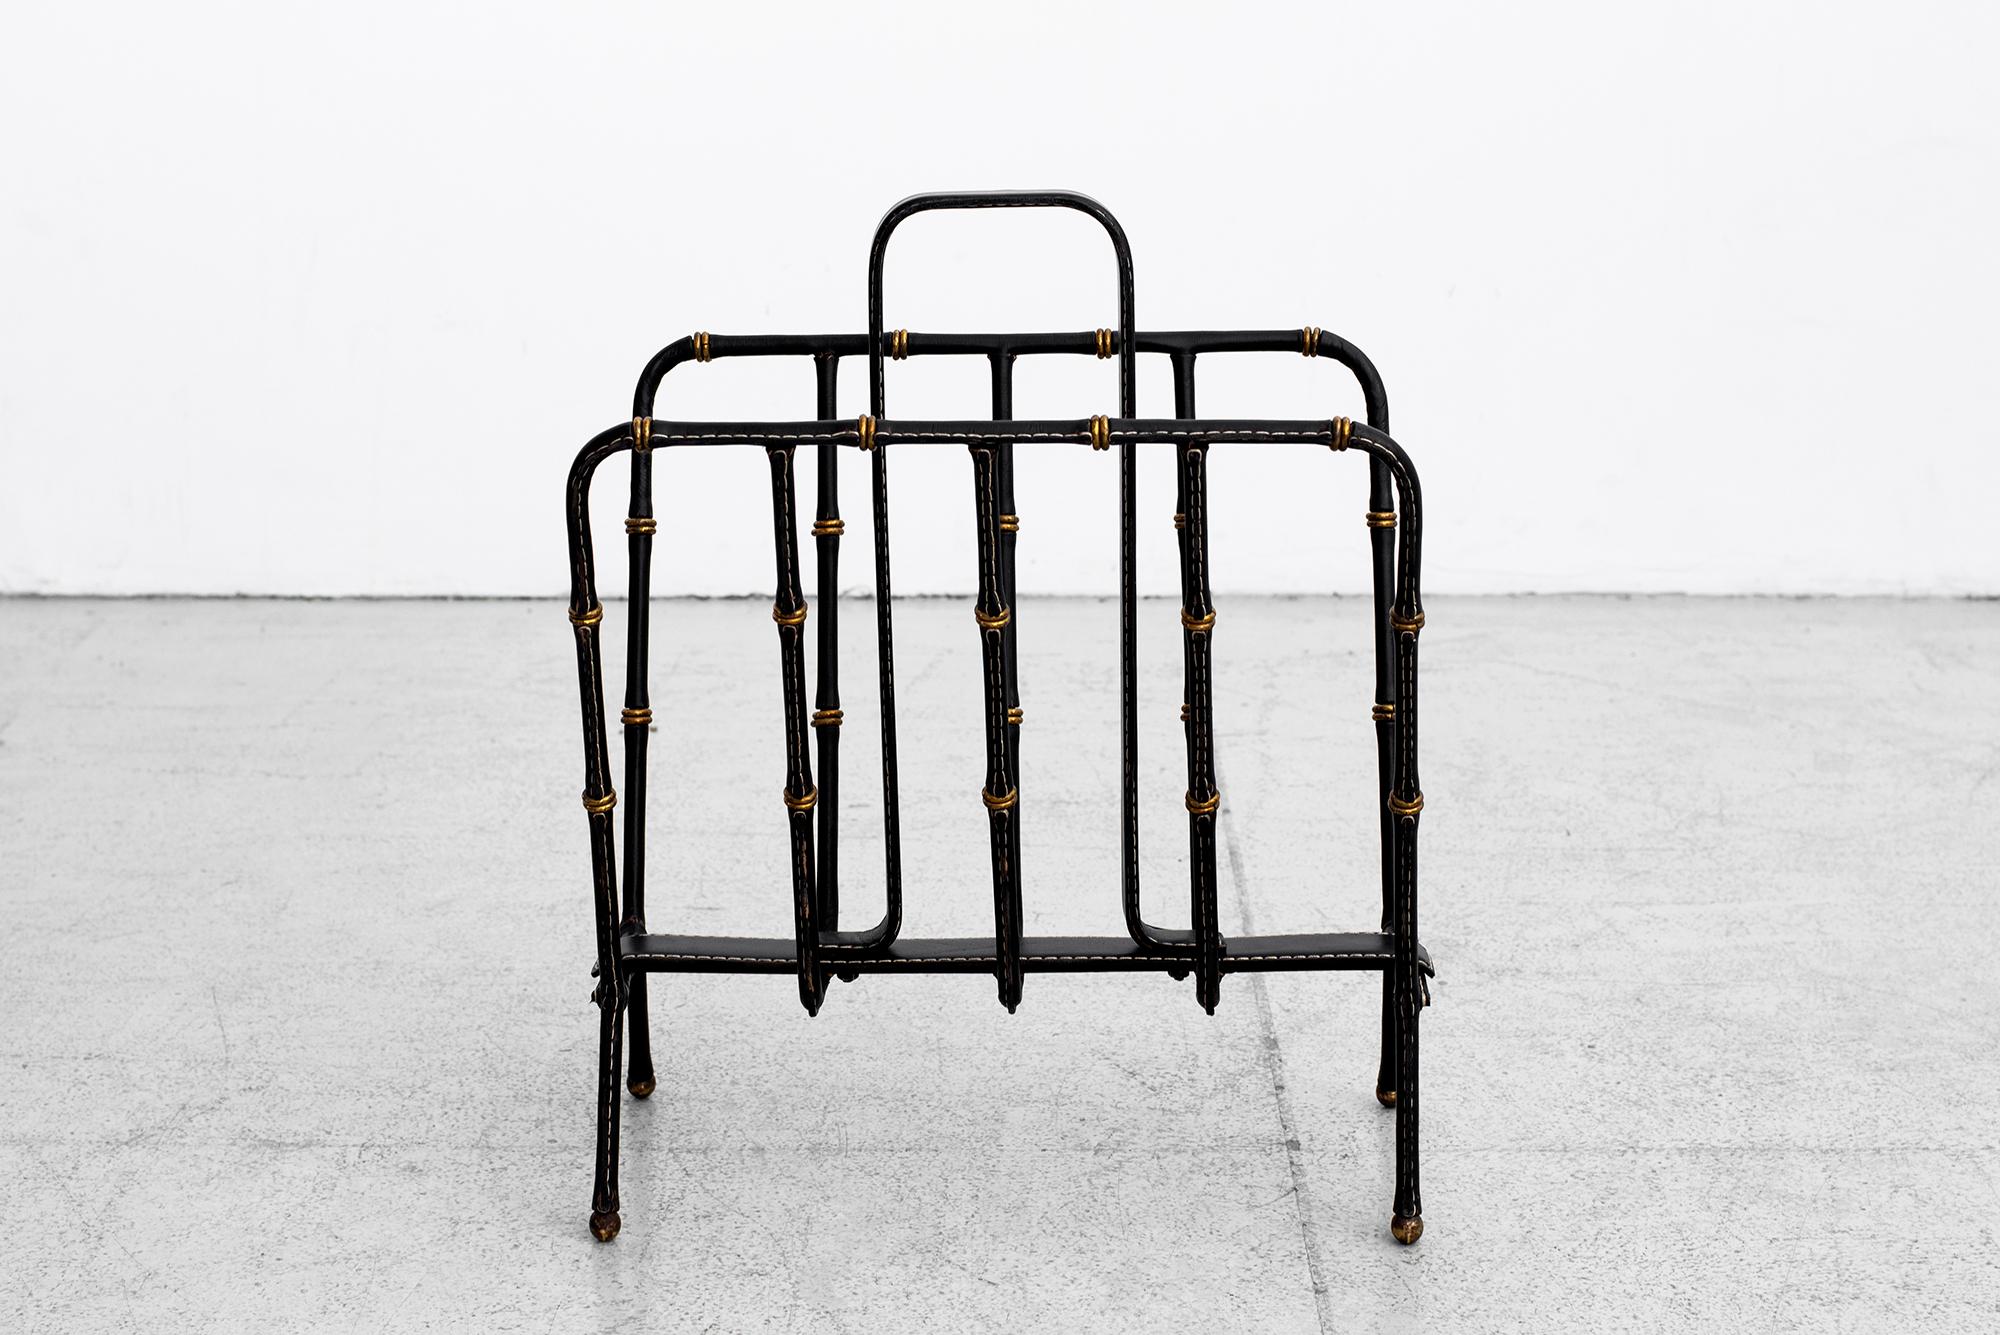 French Jacques Adnet Magazine Rack